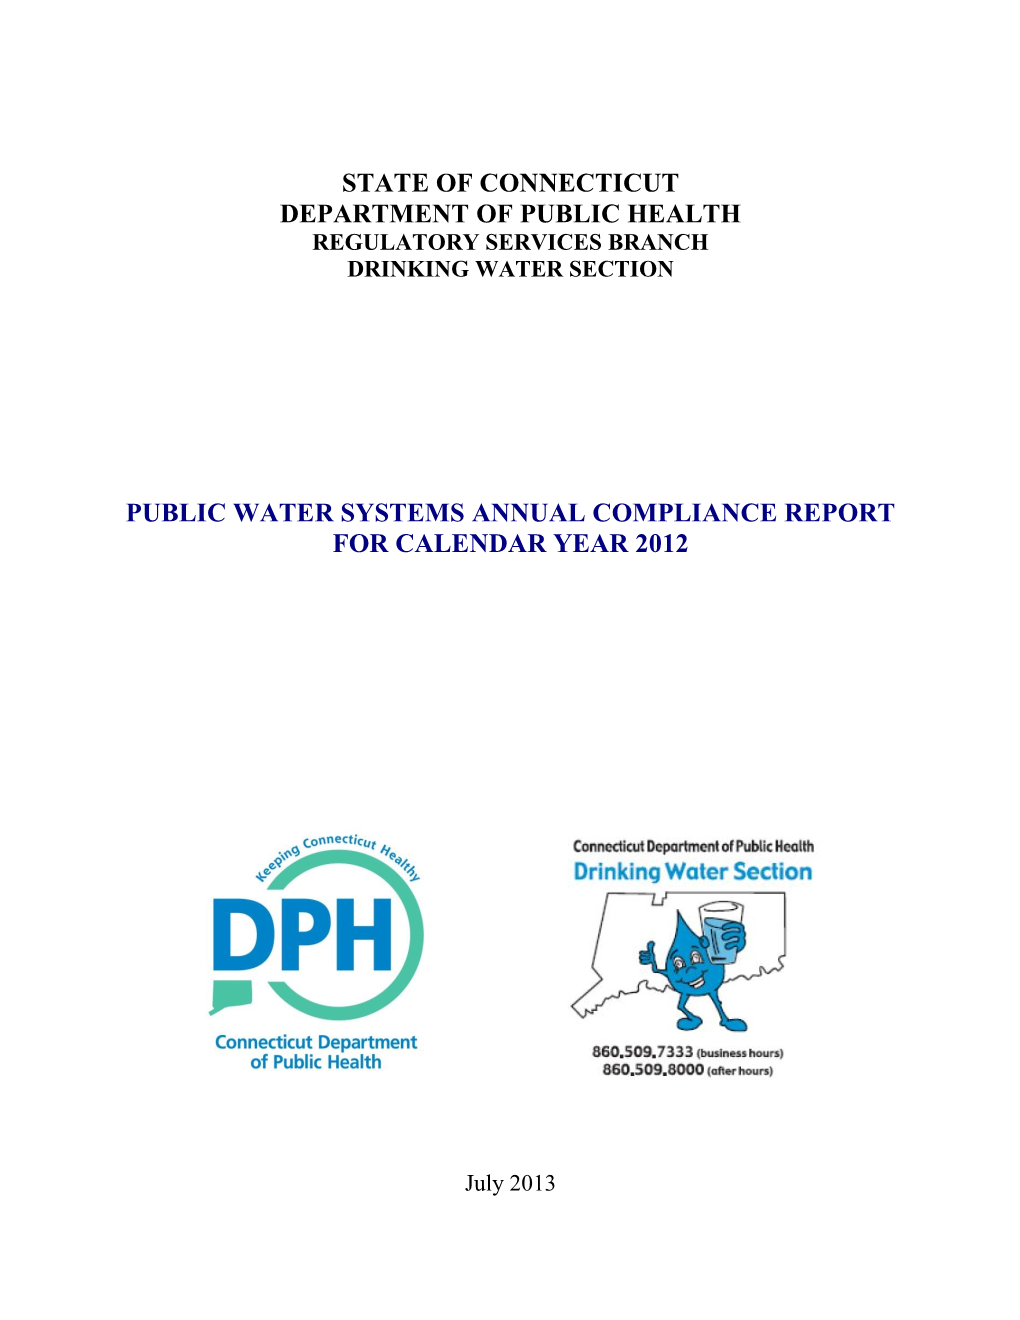 Public Water Systems Annual Compliance Report for Calendar Year 2012